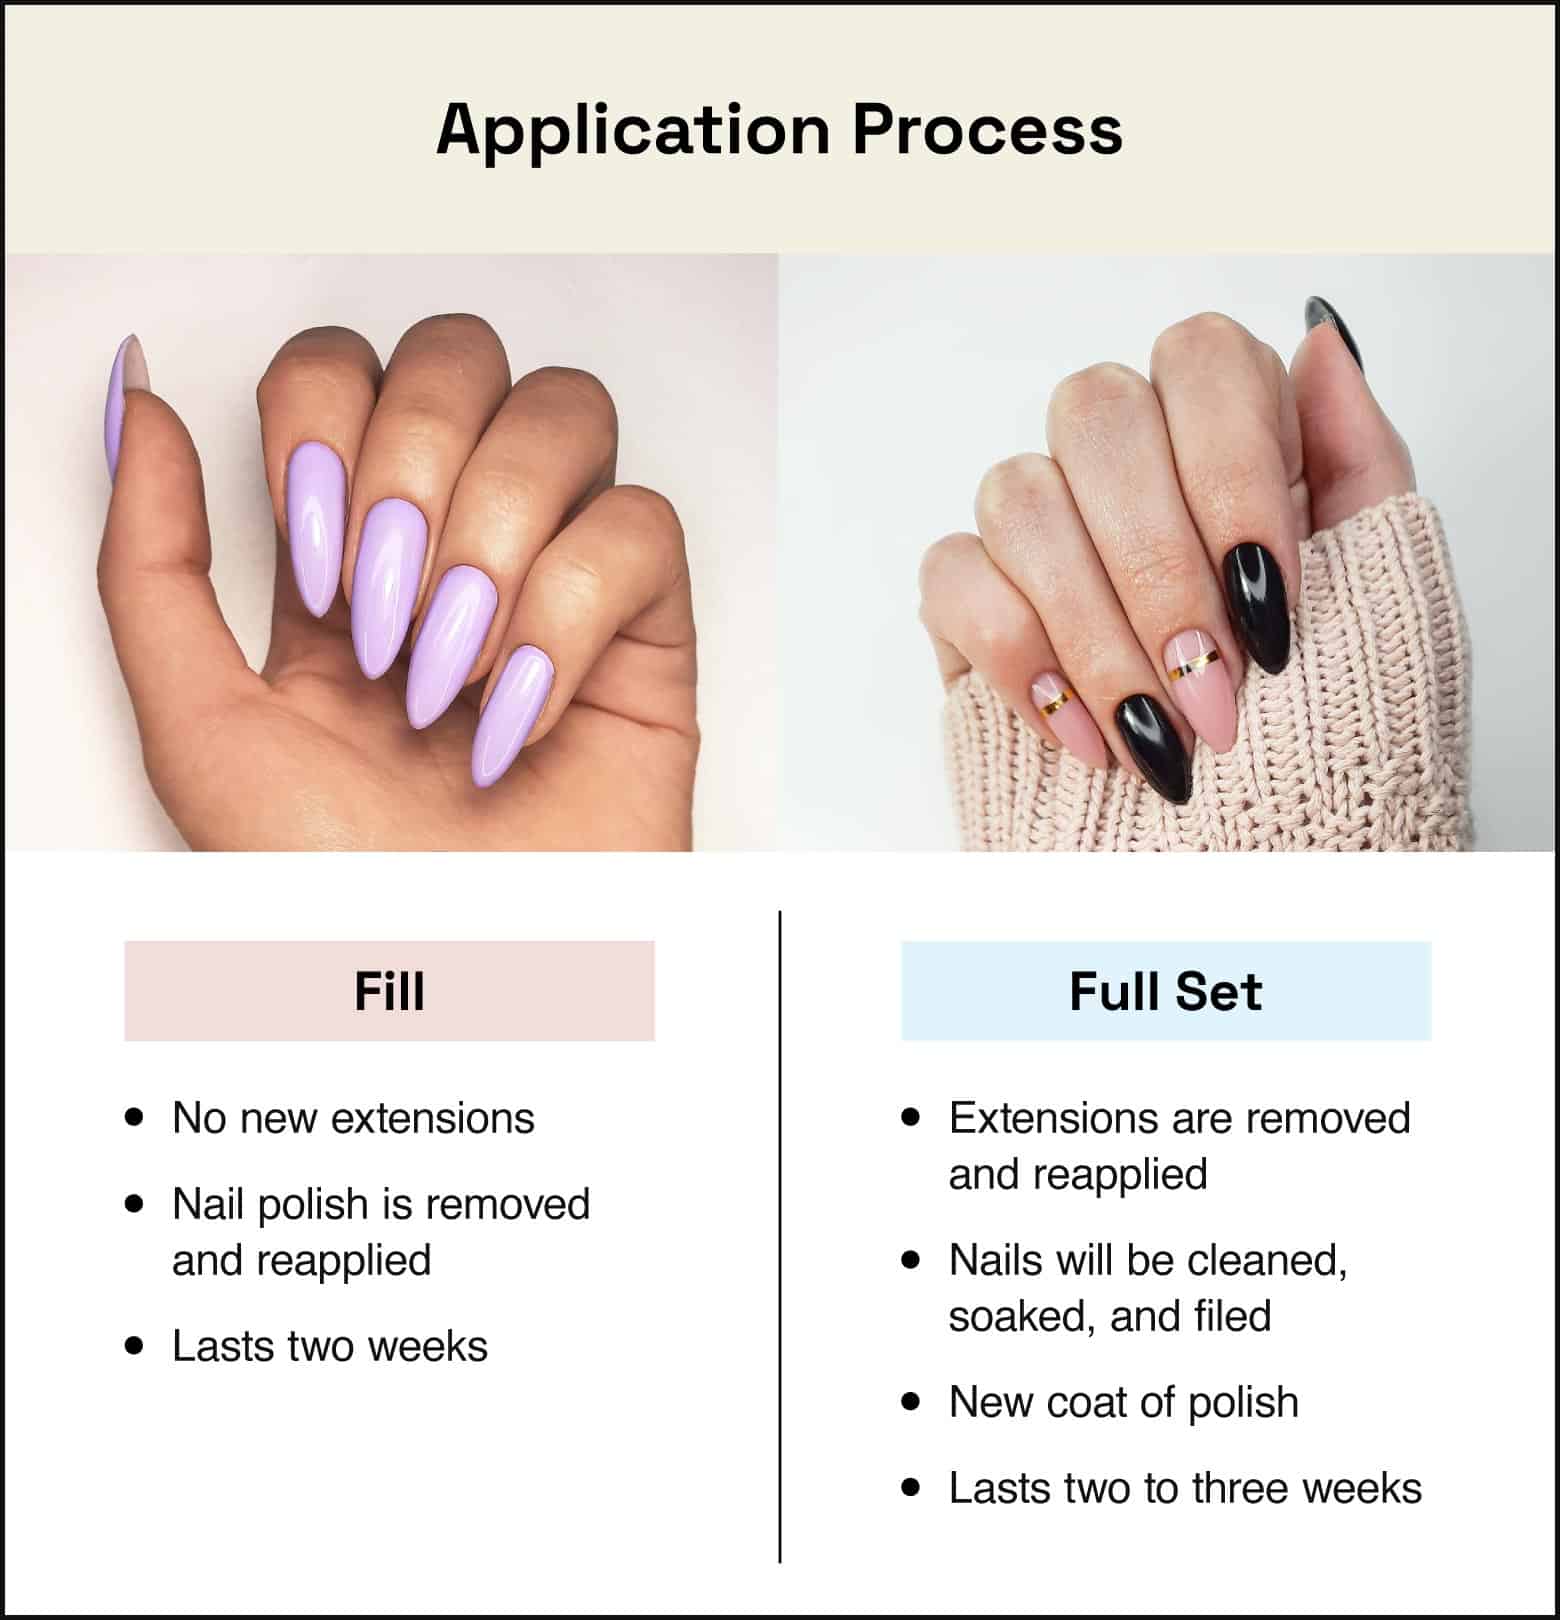 How Much Does It Cost to Get Your Nails Done? StyleSeat